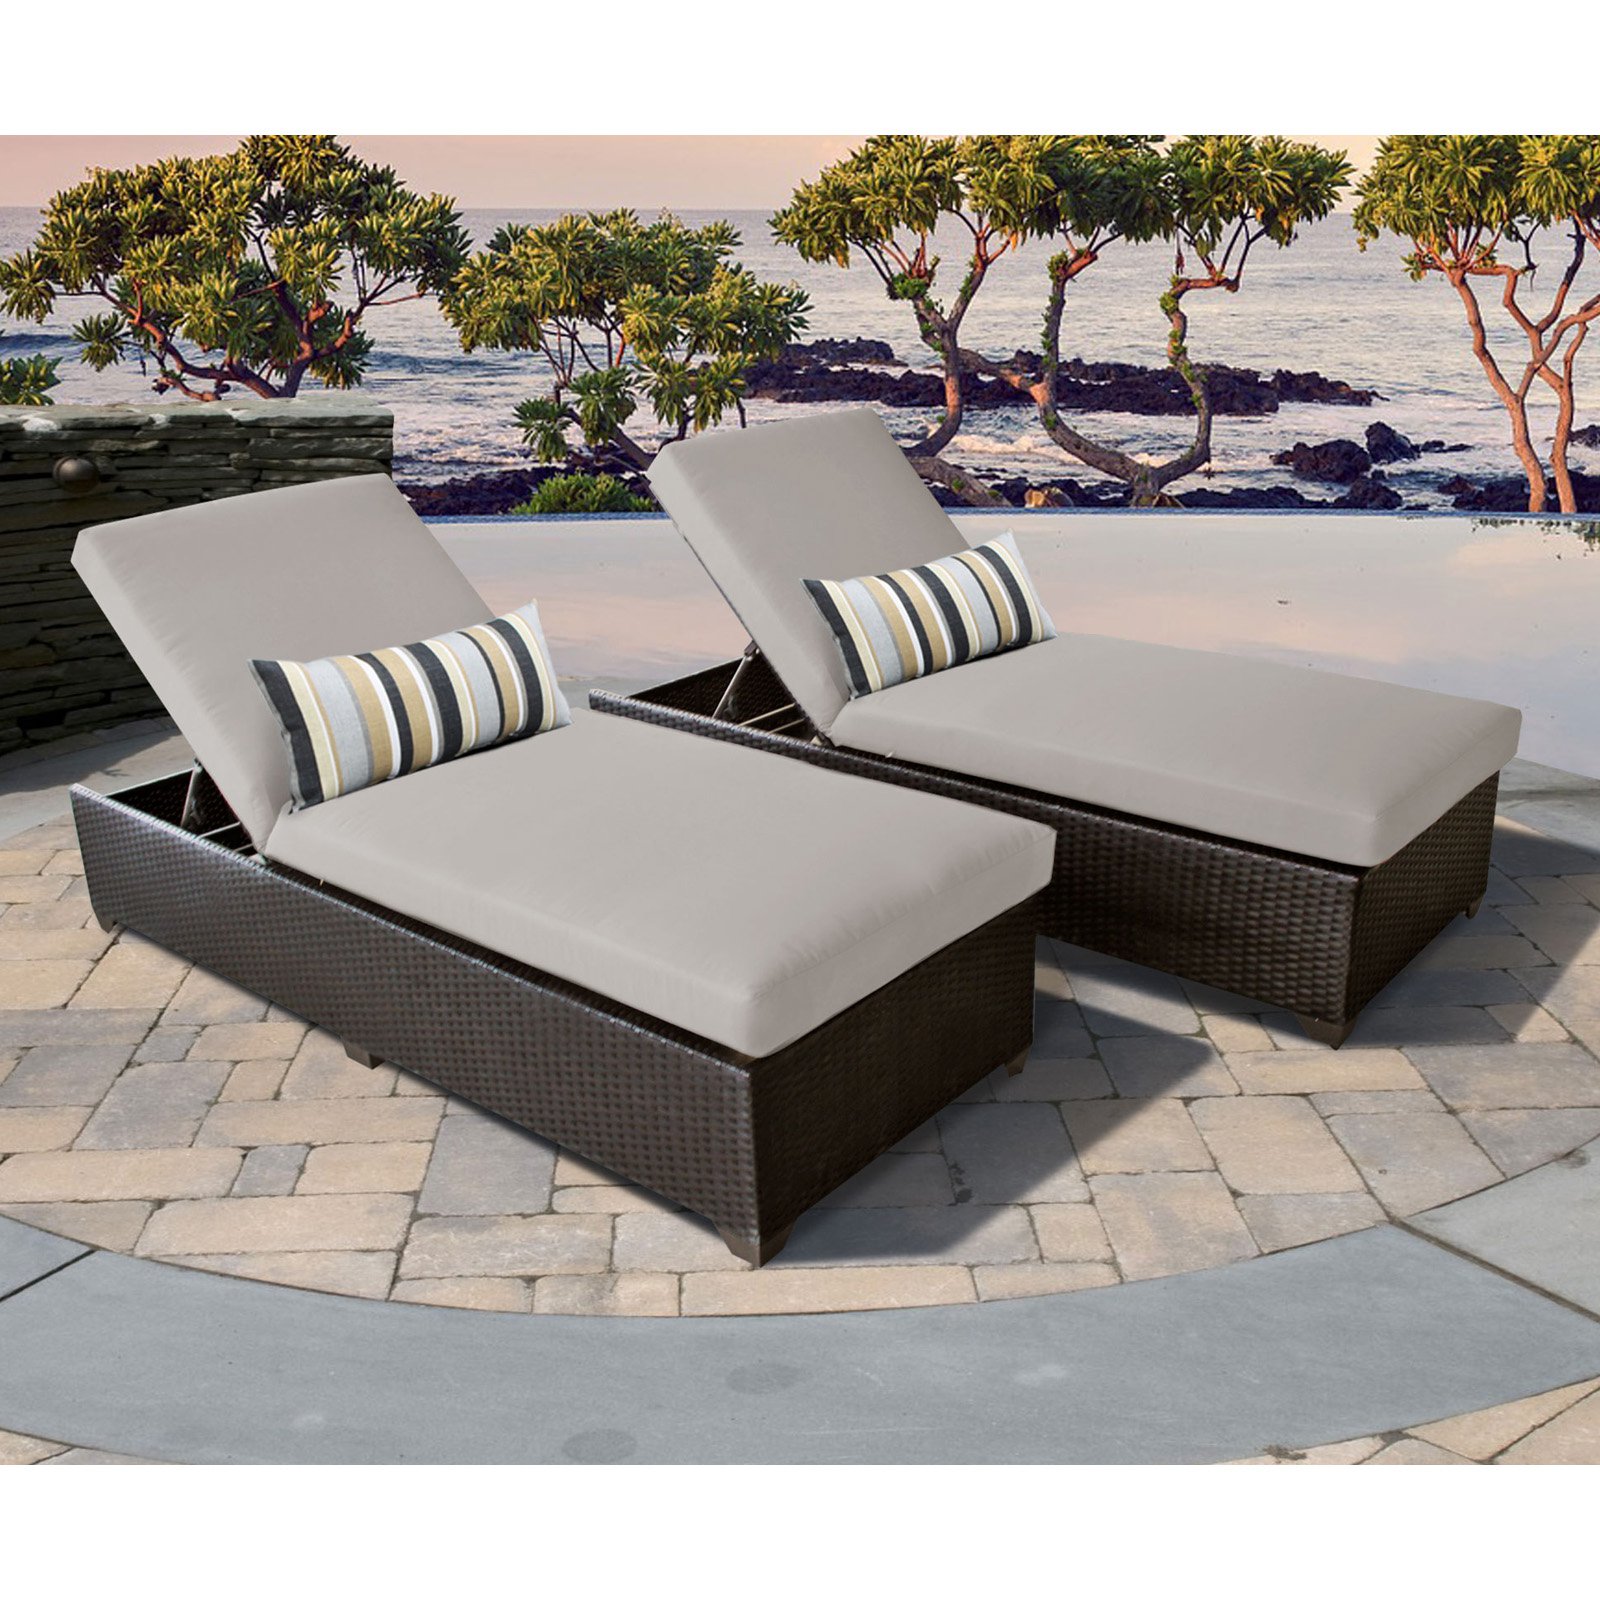 Belle Chaise Set of 2 Outdoor Wicker Patio Furniture-Color:Tangerine - image 4 of 11